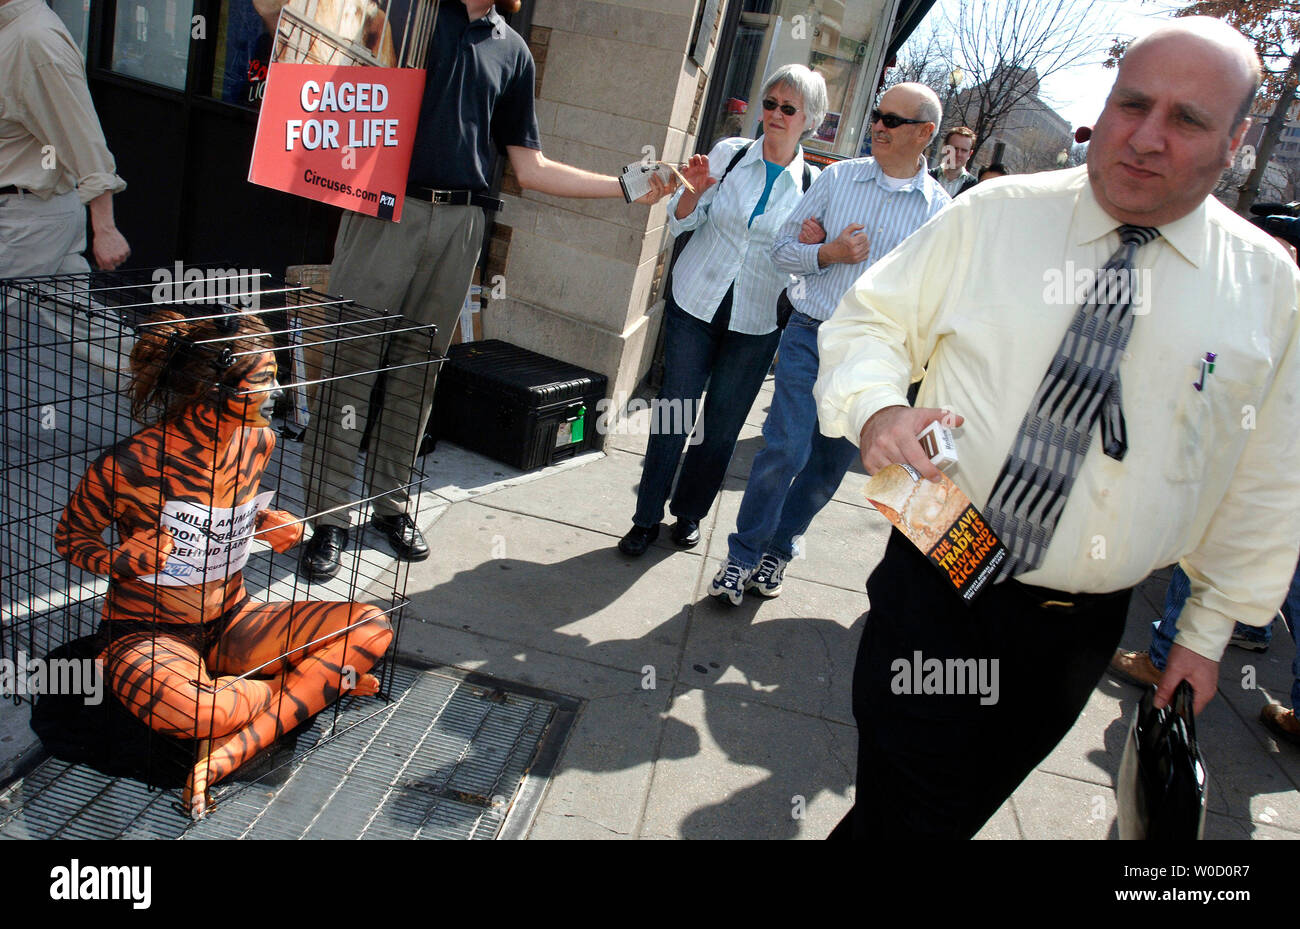 People for the Ethical Treatment of Animals (PETA) volunteer Amy Jannette, dressed as a tiger and sitting in a cage, participates in a PETA protest of Ringling Brothers and Barnum & Bailey Circus, in Washington on March 10, 2006. PETA claims that the circus treats their animals in inhumane ways including cramped living conditions, sever beatings and other cruel acts. (UPI Photo/Kevin Dietsch) Stock Photo